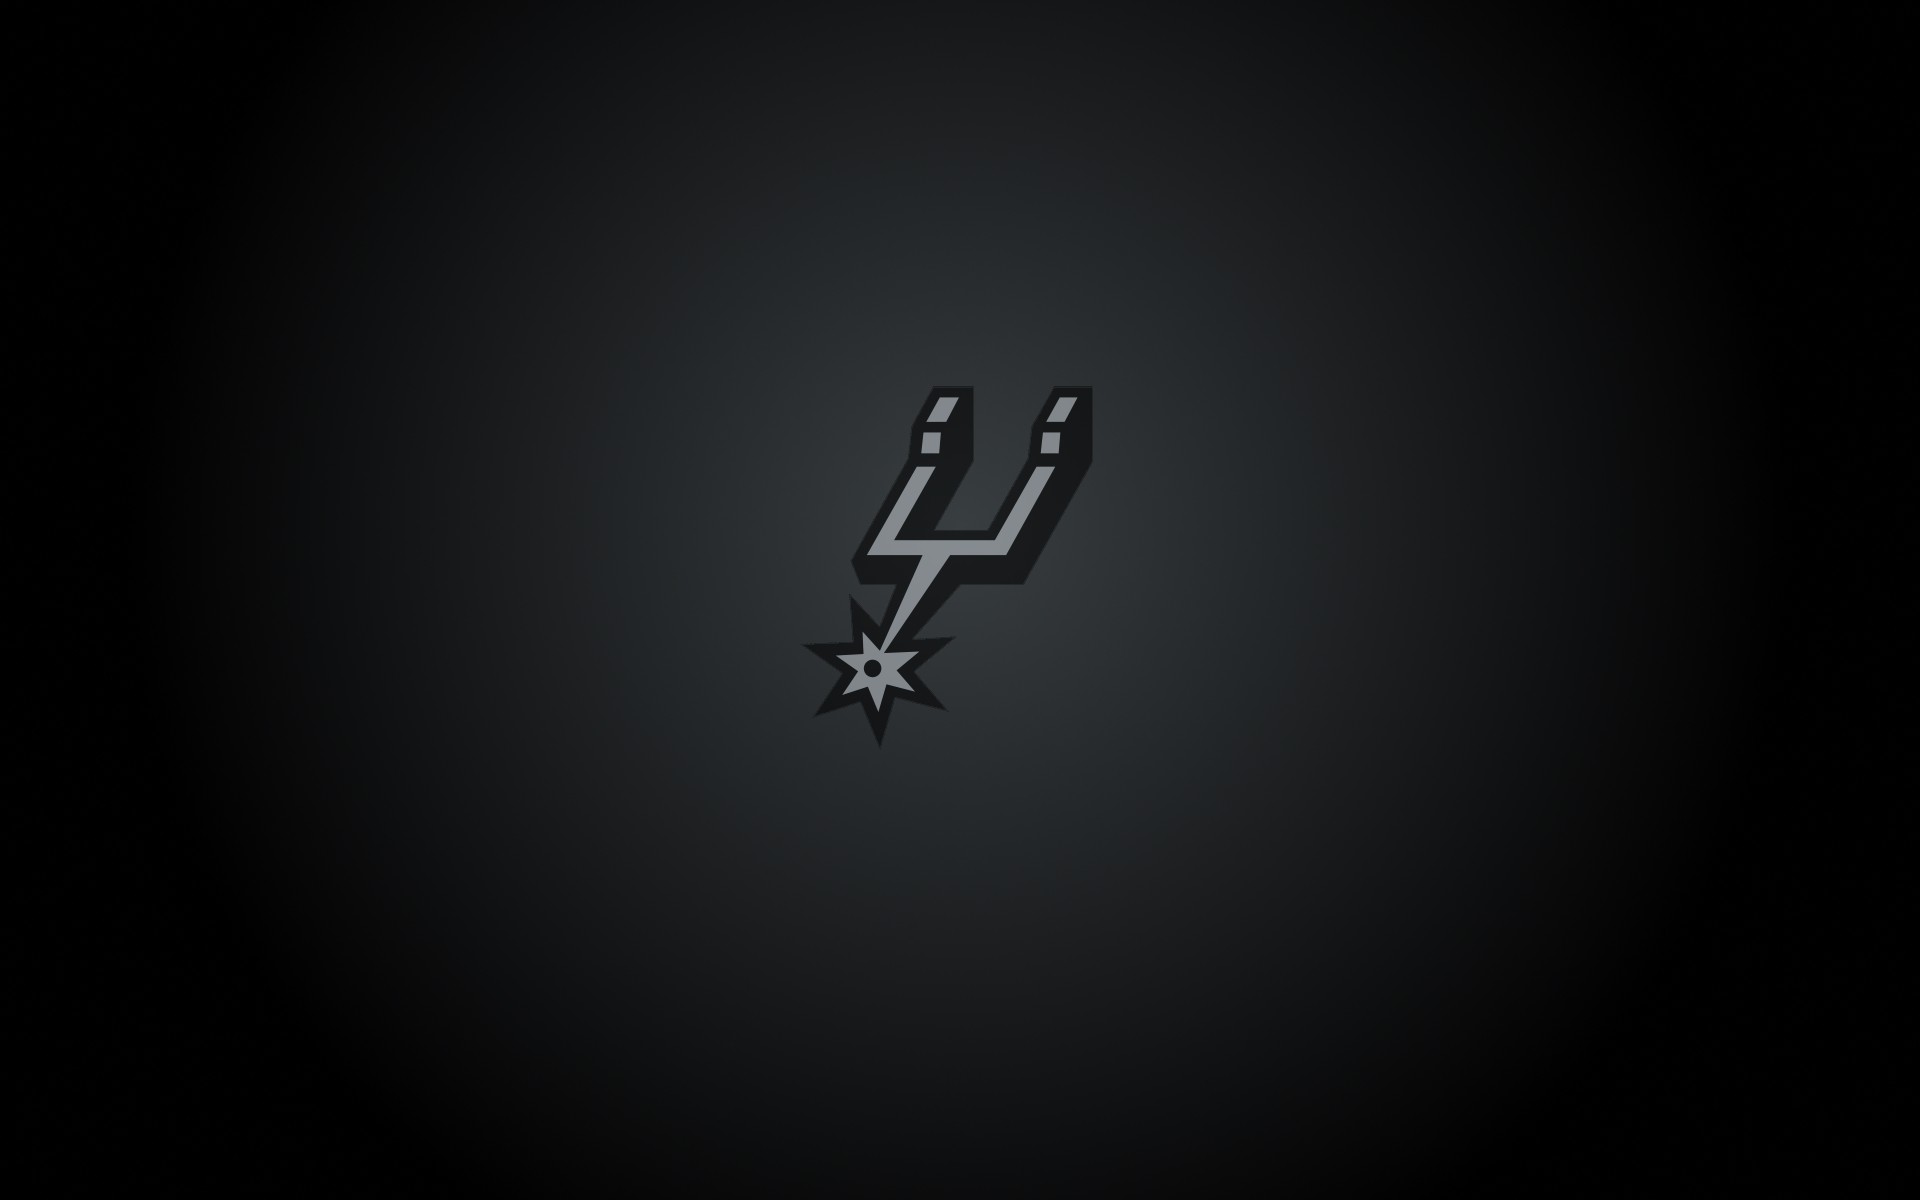 1920x1200 San Antonio Spurs wallpaper and logo on it  px, widescreen 16x10